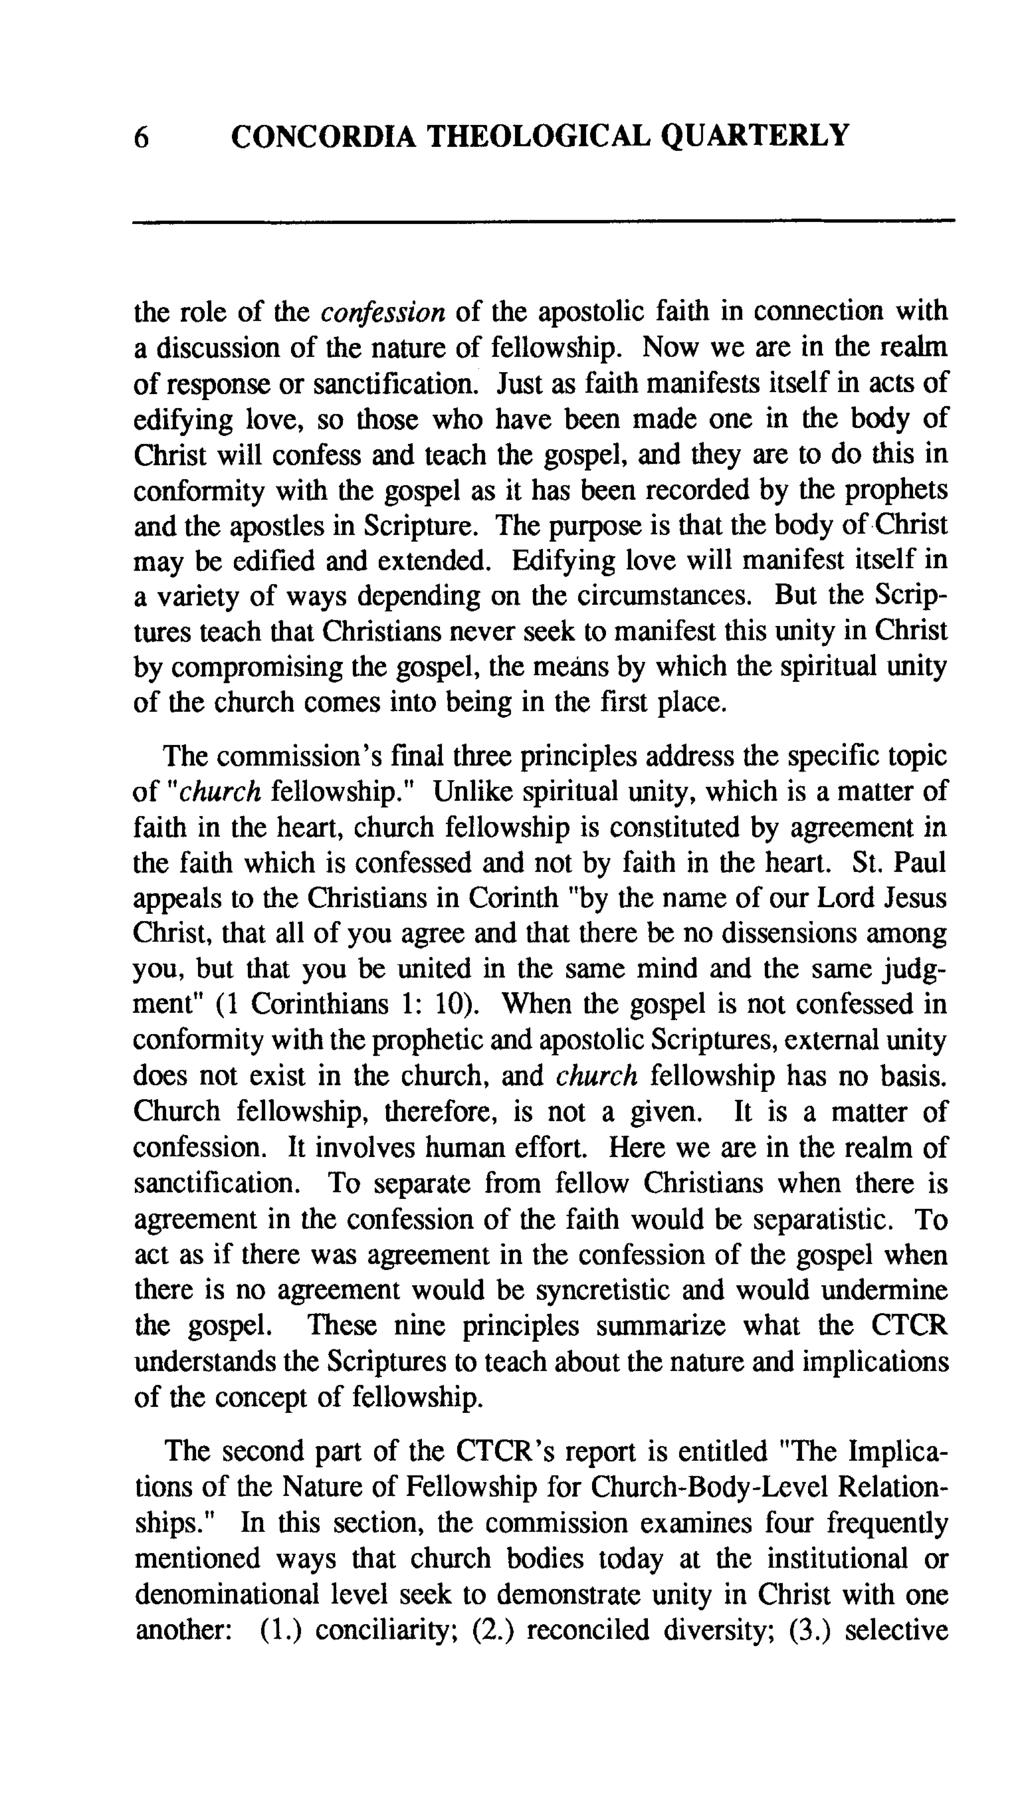 6 CONCORDIA THEOLOGICAL QUARTERLY the role of the confession of the apostolic faith in connection with a discussion of the nature of fellowship. Now we are in the realm of response or sanctification.